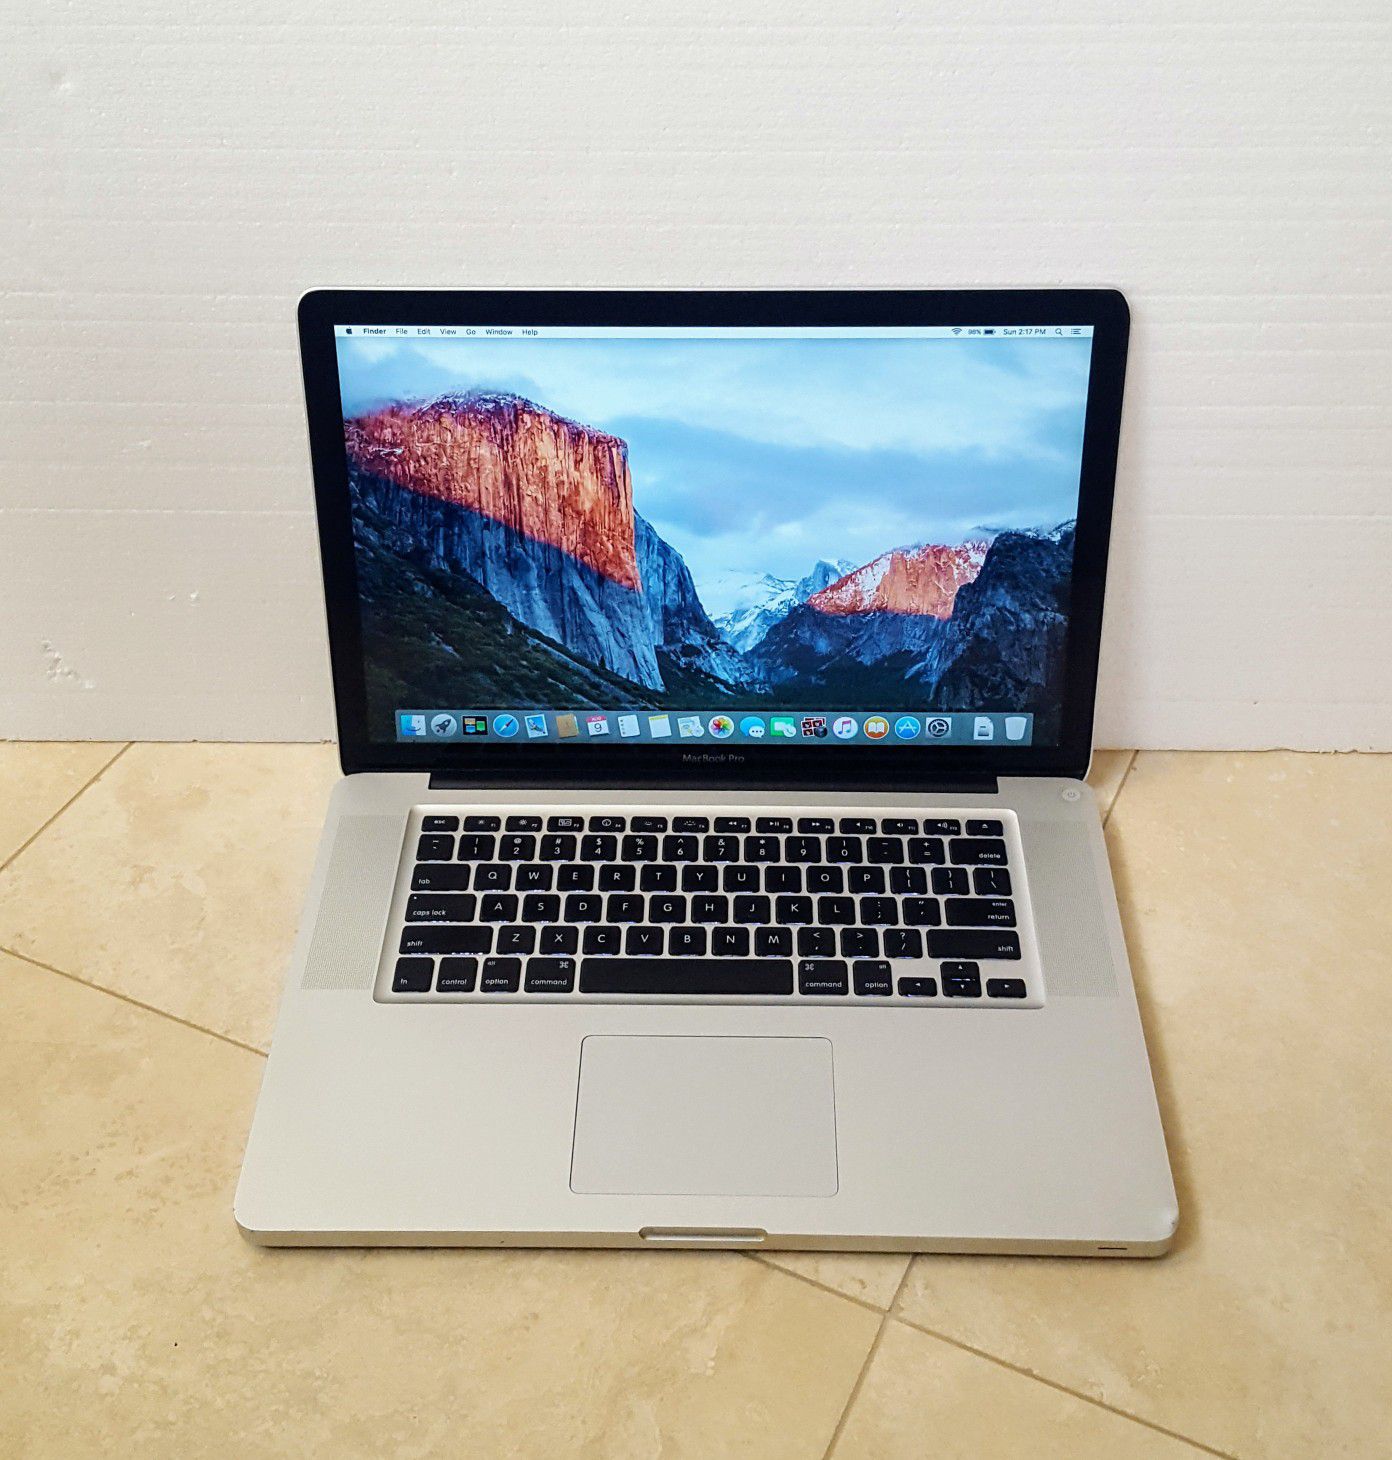 Apple MacBook Pro (15-inch , Mid 2009 ) ,Intel Core 2 Duo CPU 2.53GHZ, 8 GB Memory, 256GB SSD - Great Condition- Make Offer !